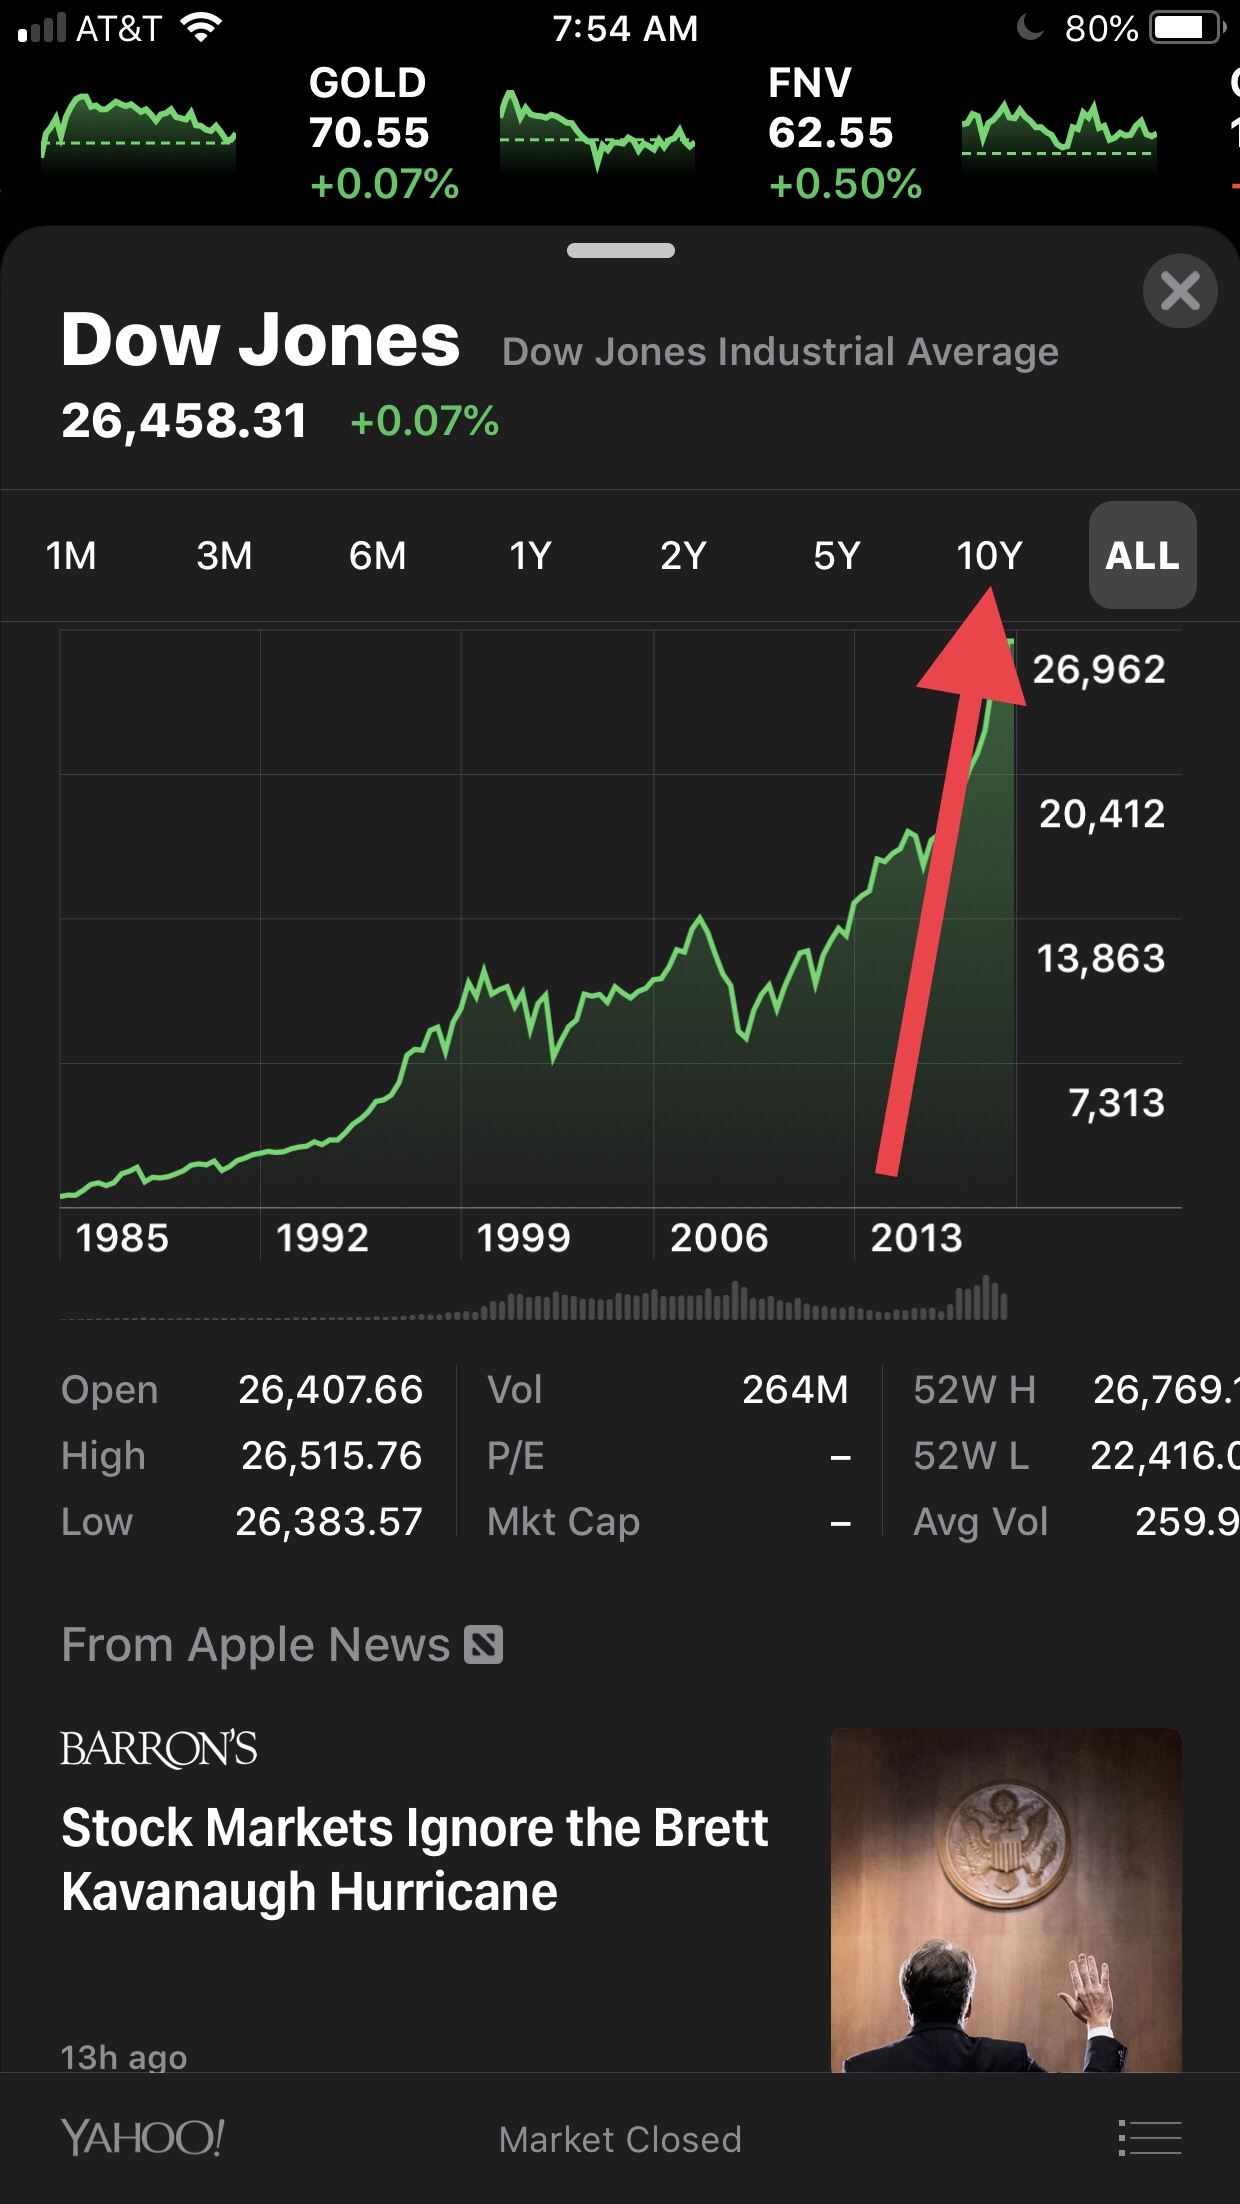 New iPhone iOS 12 stocks app reveal 10 year and ALL range